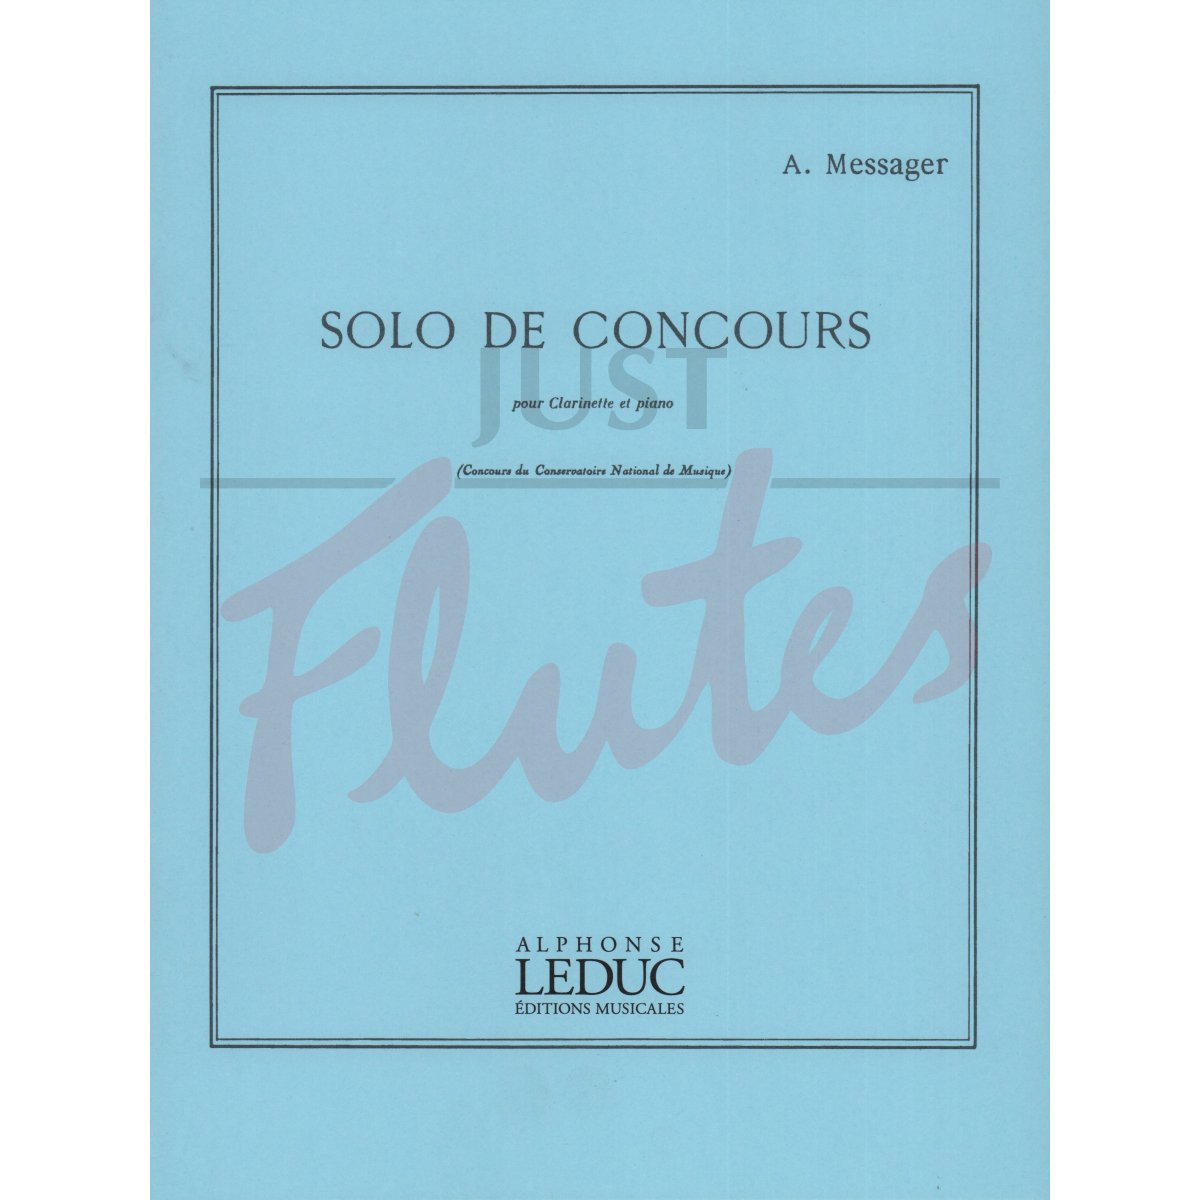 Solo de Concours for Clarinet and Piano